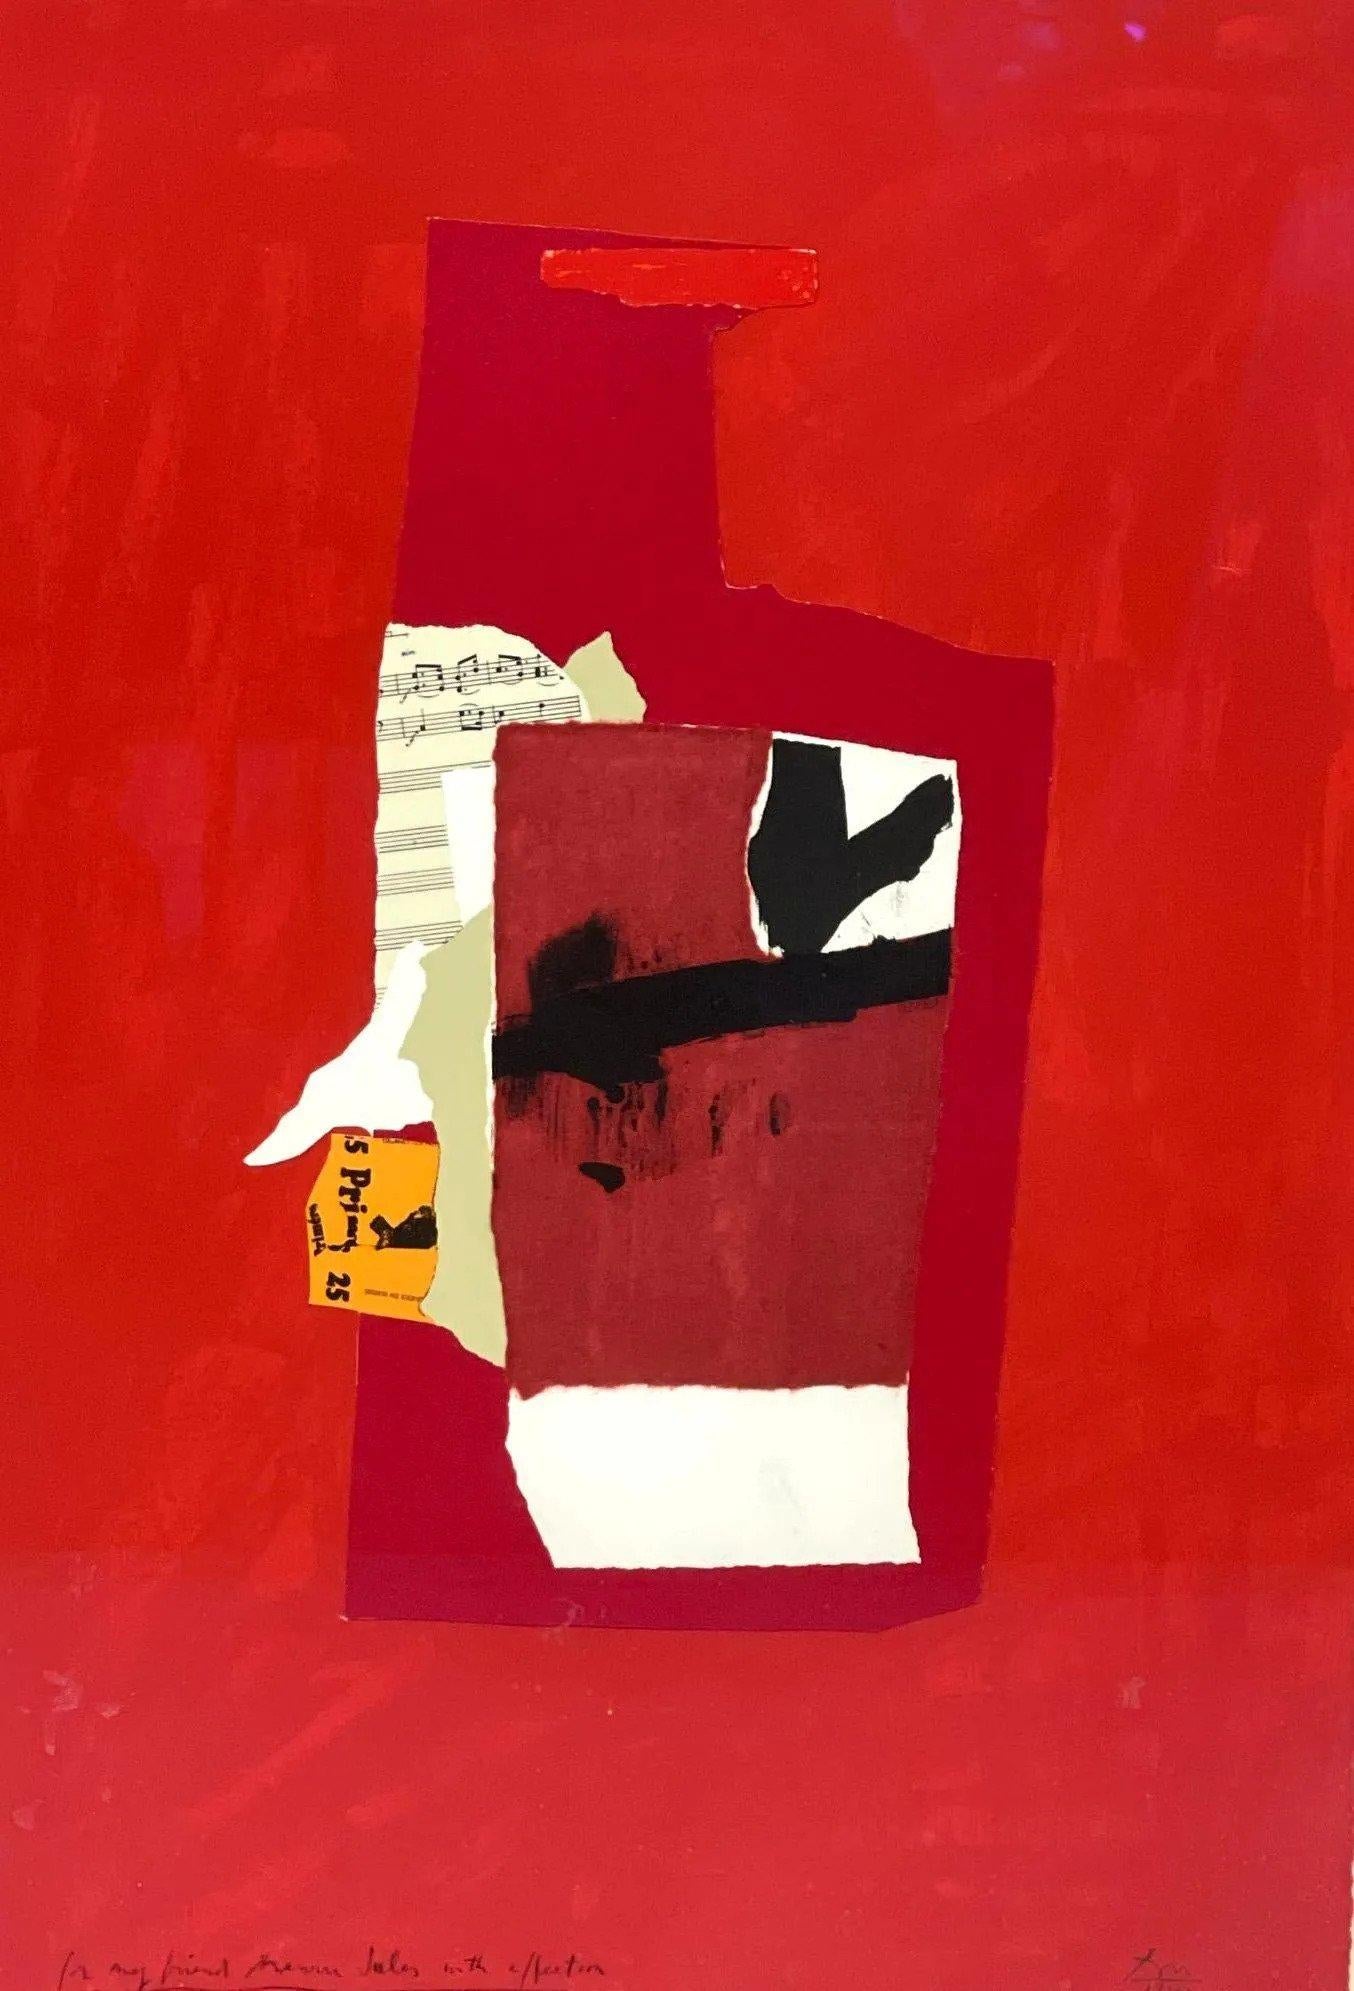 "Redness of Red" Lithograph Screenprint Collage Contemporary Abstract Abex 1/100 - Mixed Media Art by Robert Motherwell